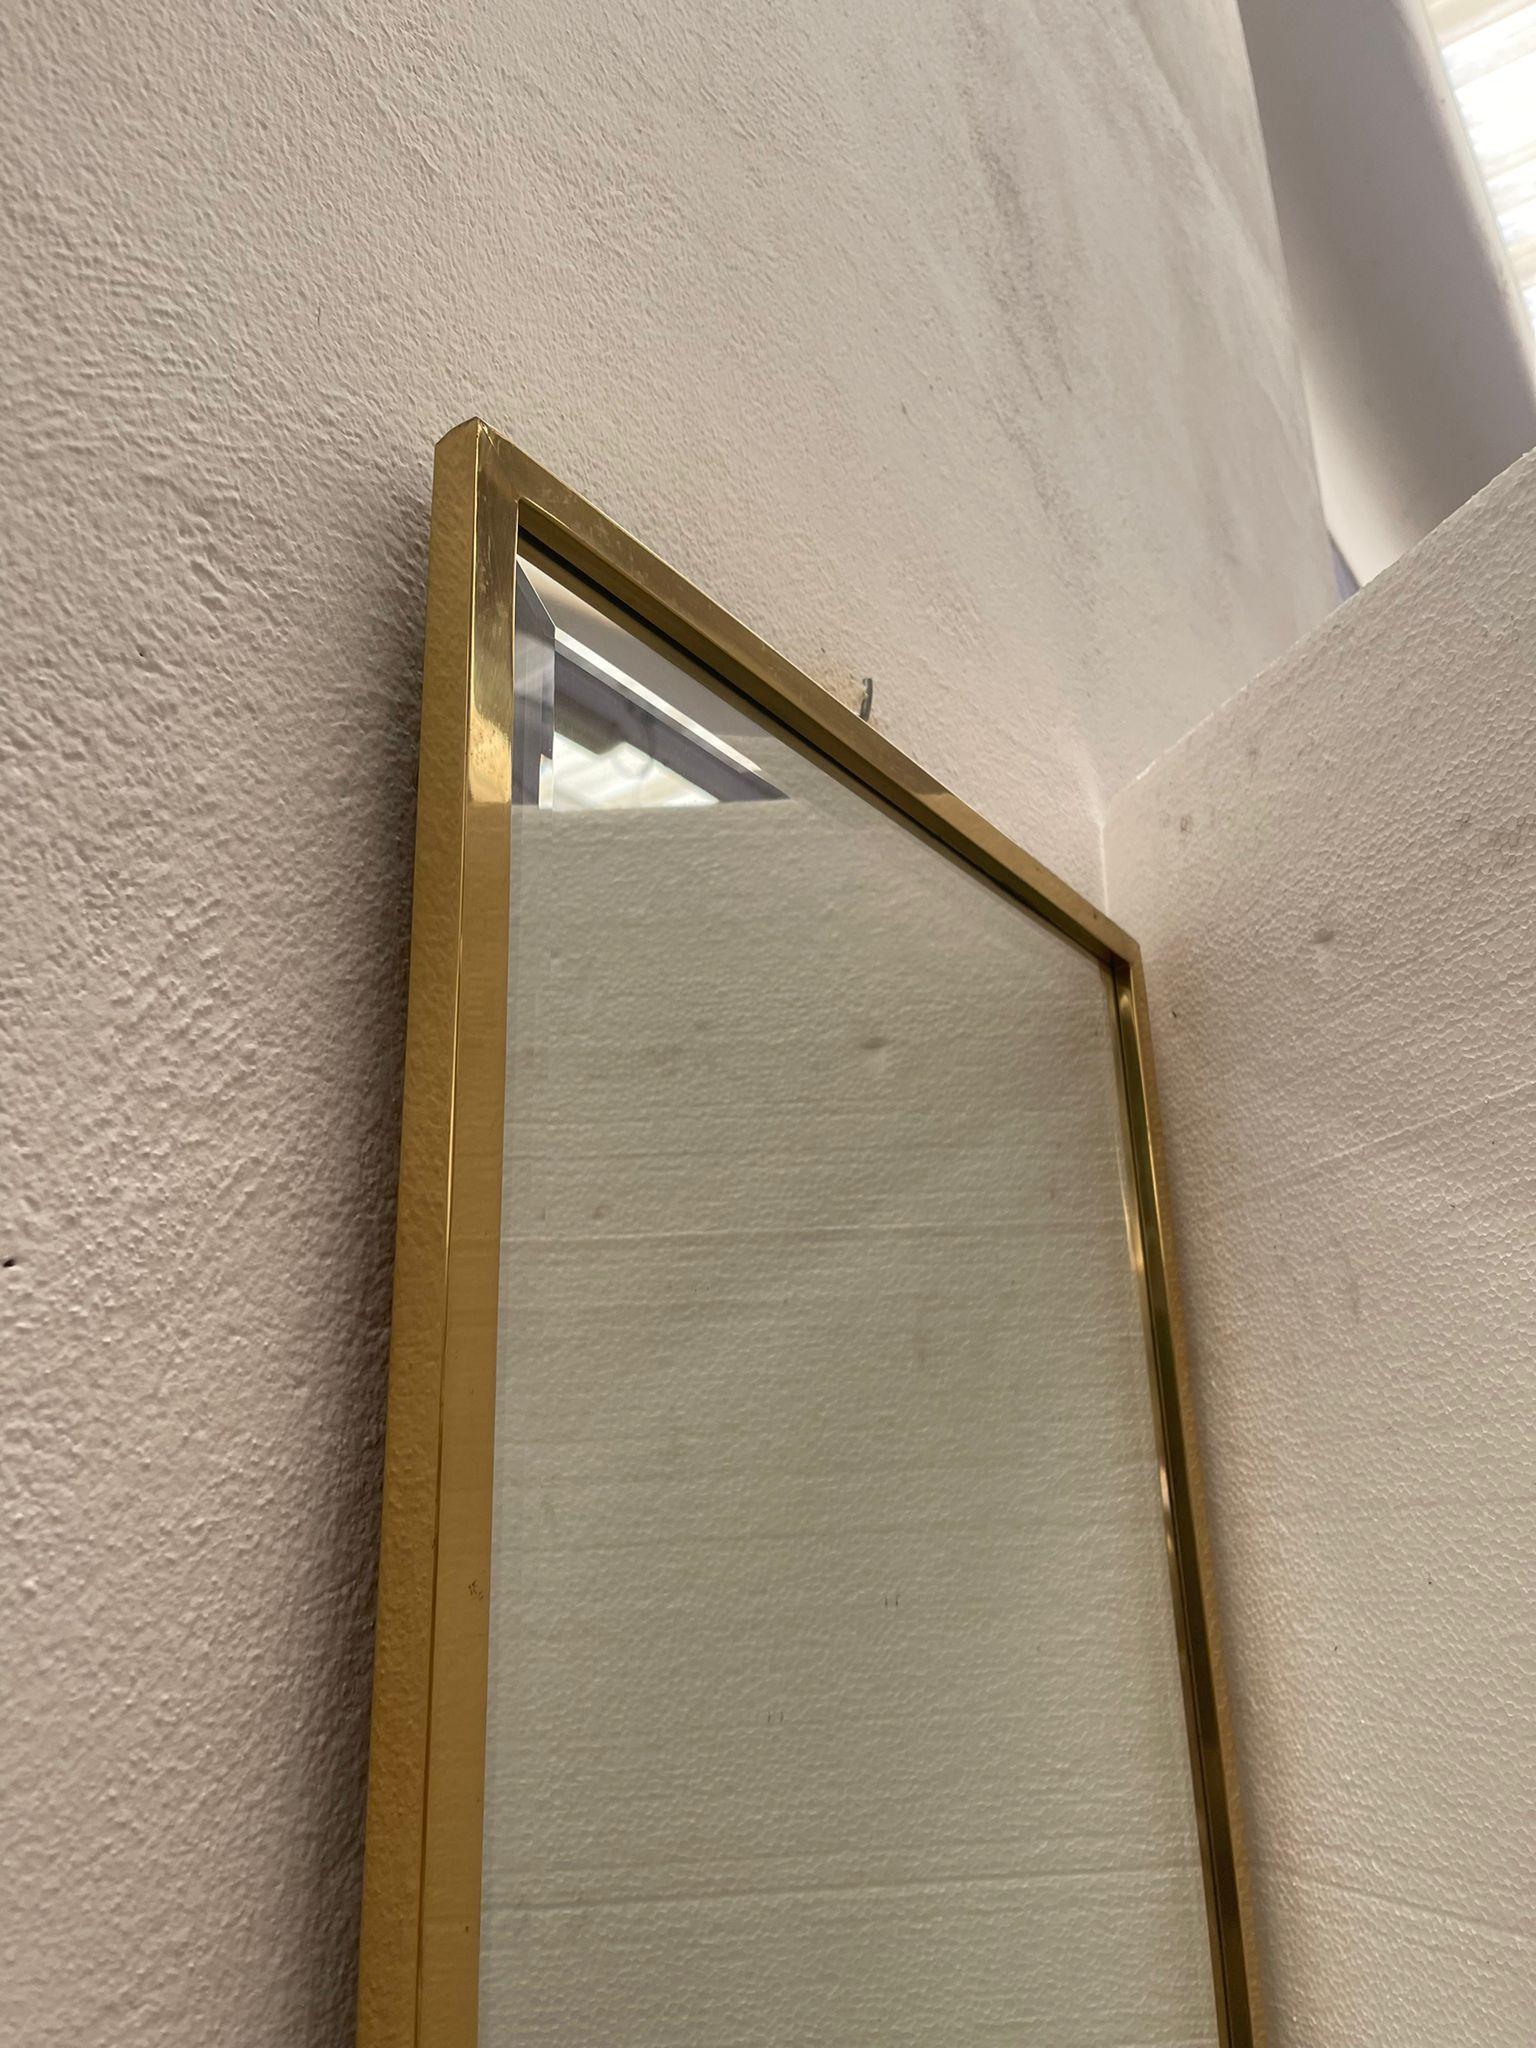 Mirror made in Italy by professionals. The gold frame gives a touch of clarity to the reflected image.

Designed by Mice Versailles.